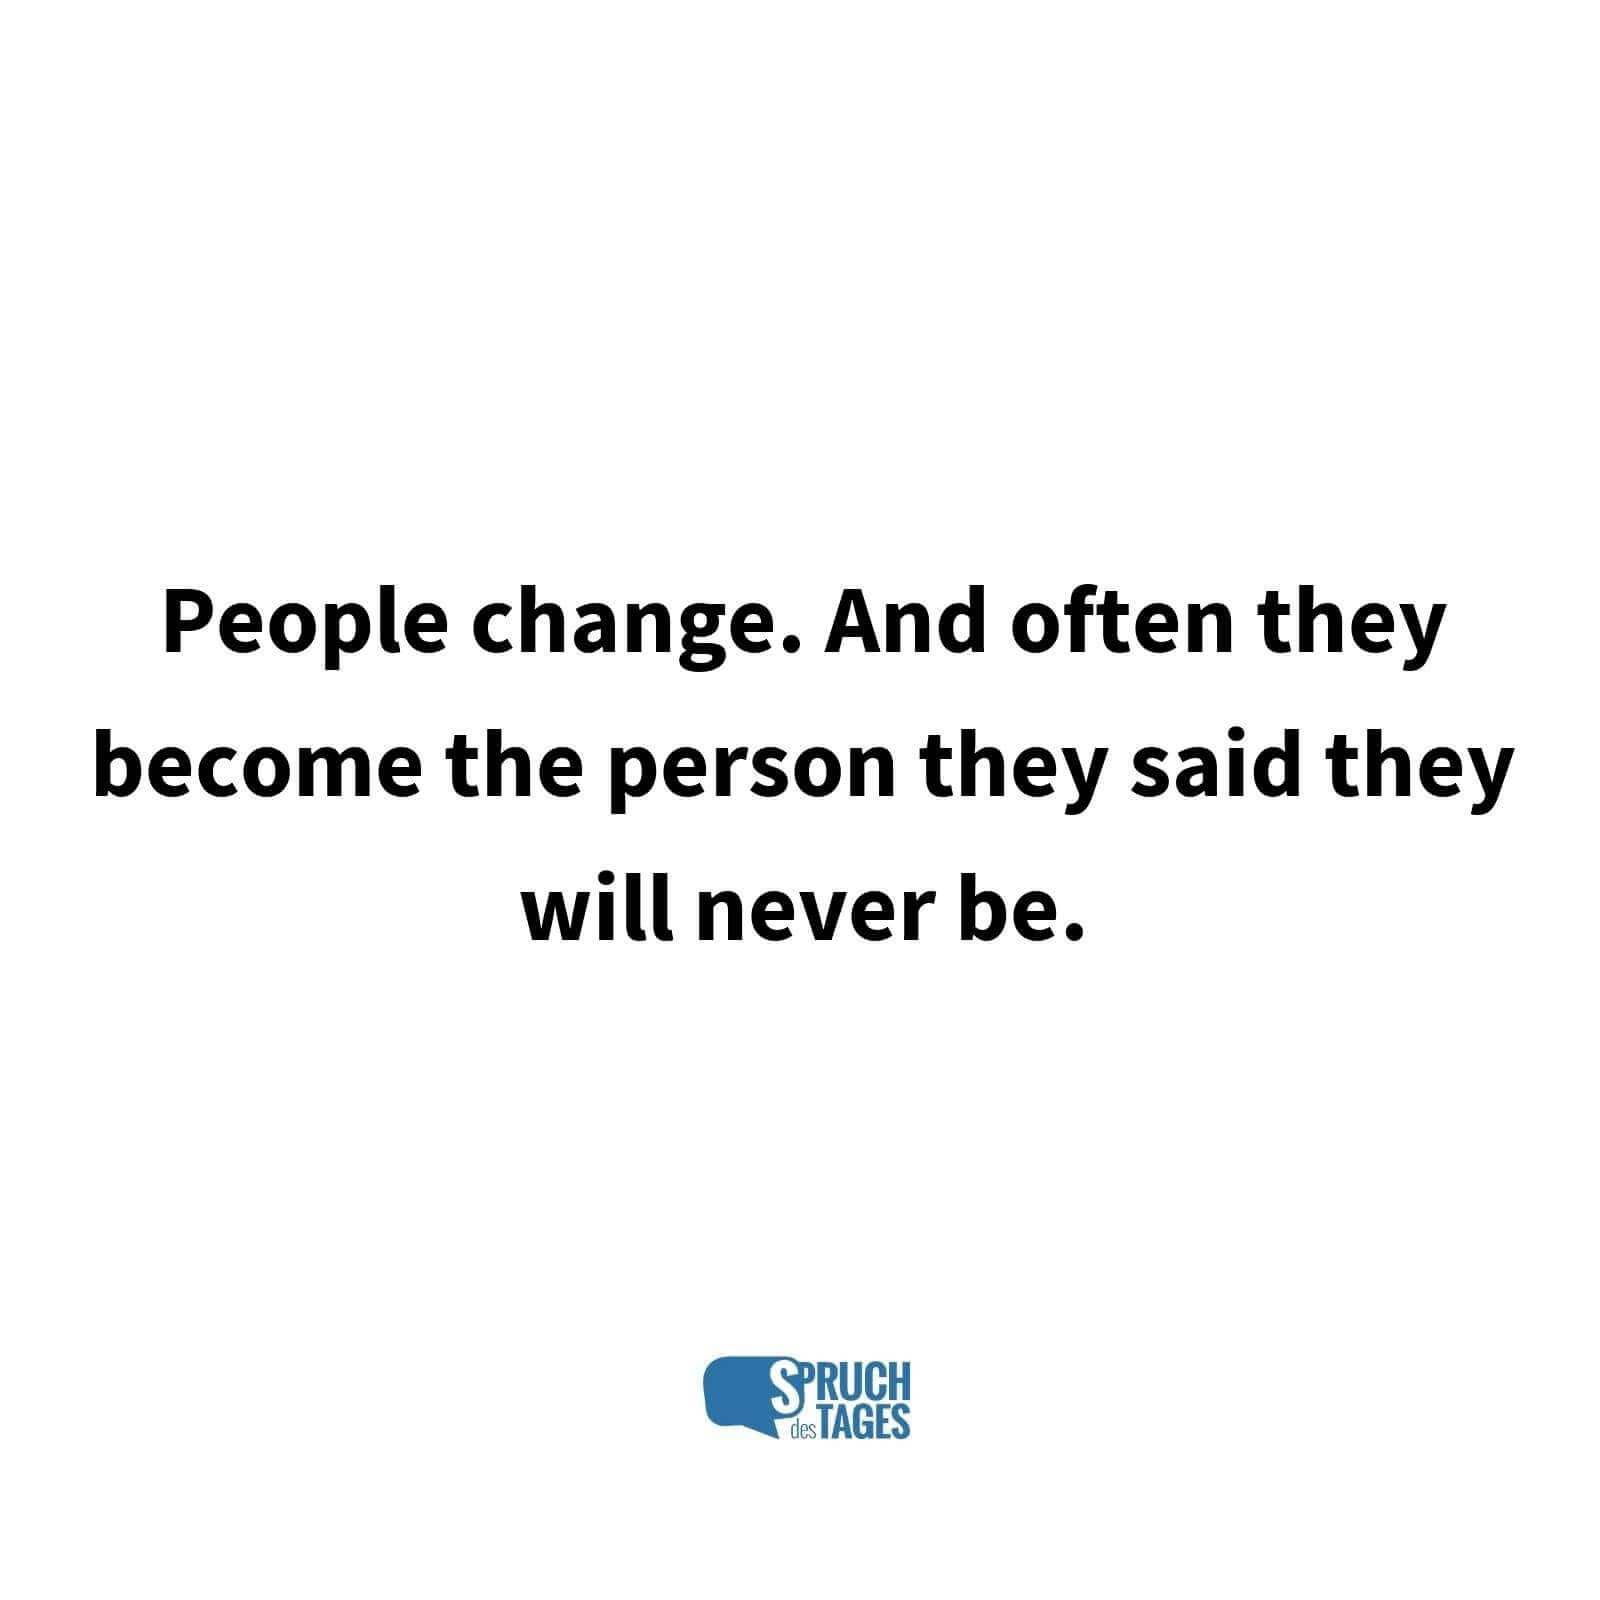 People change. And often they become the person they said they will never be.